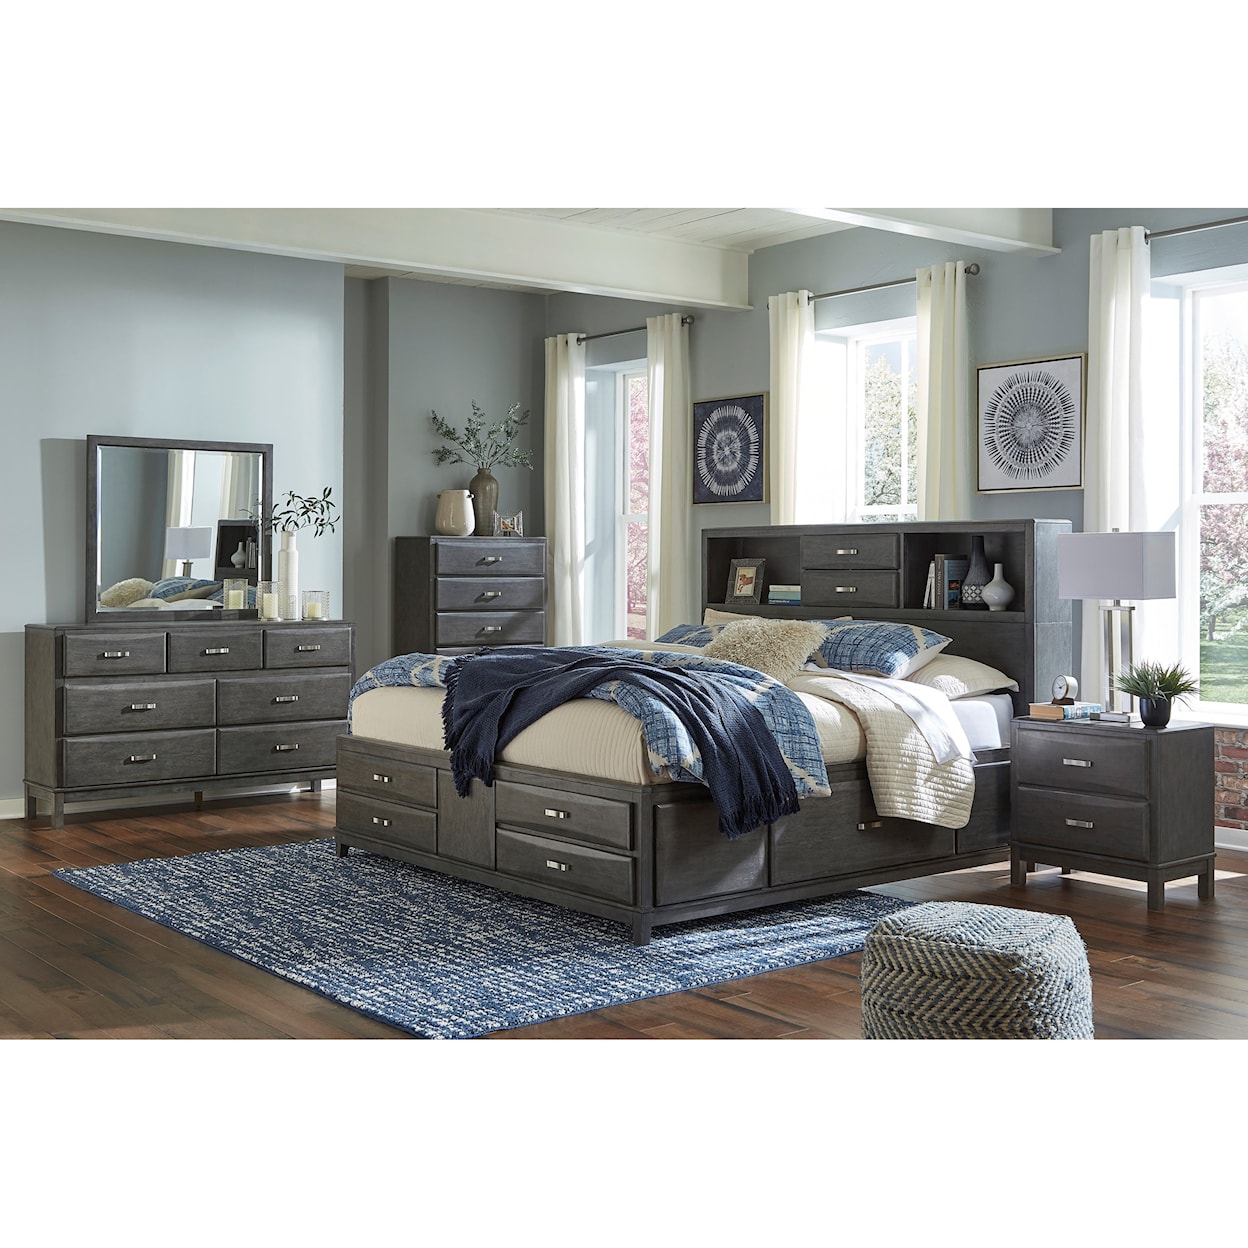 Signature Caitlyn King Bedroom Group